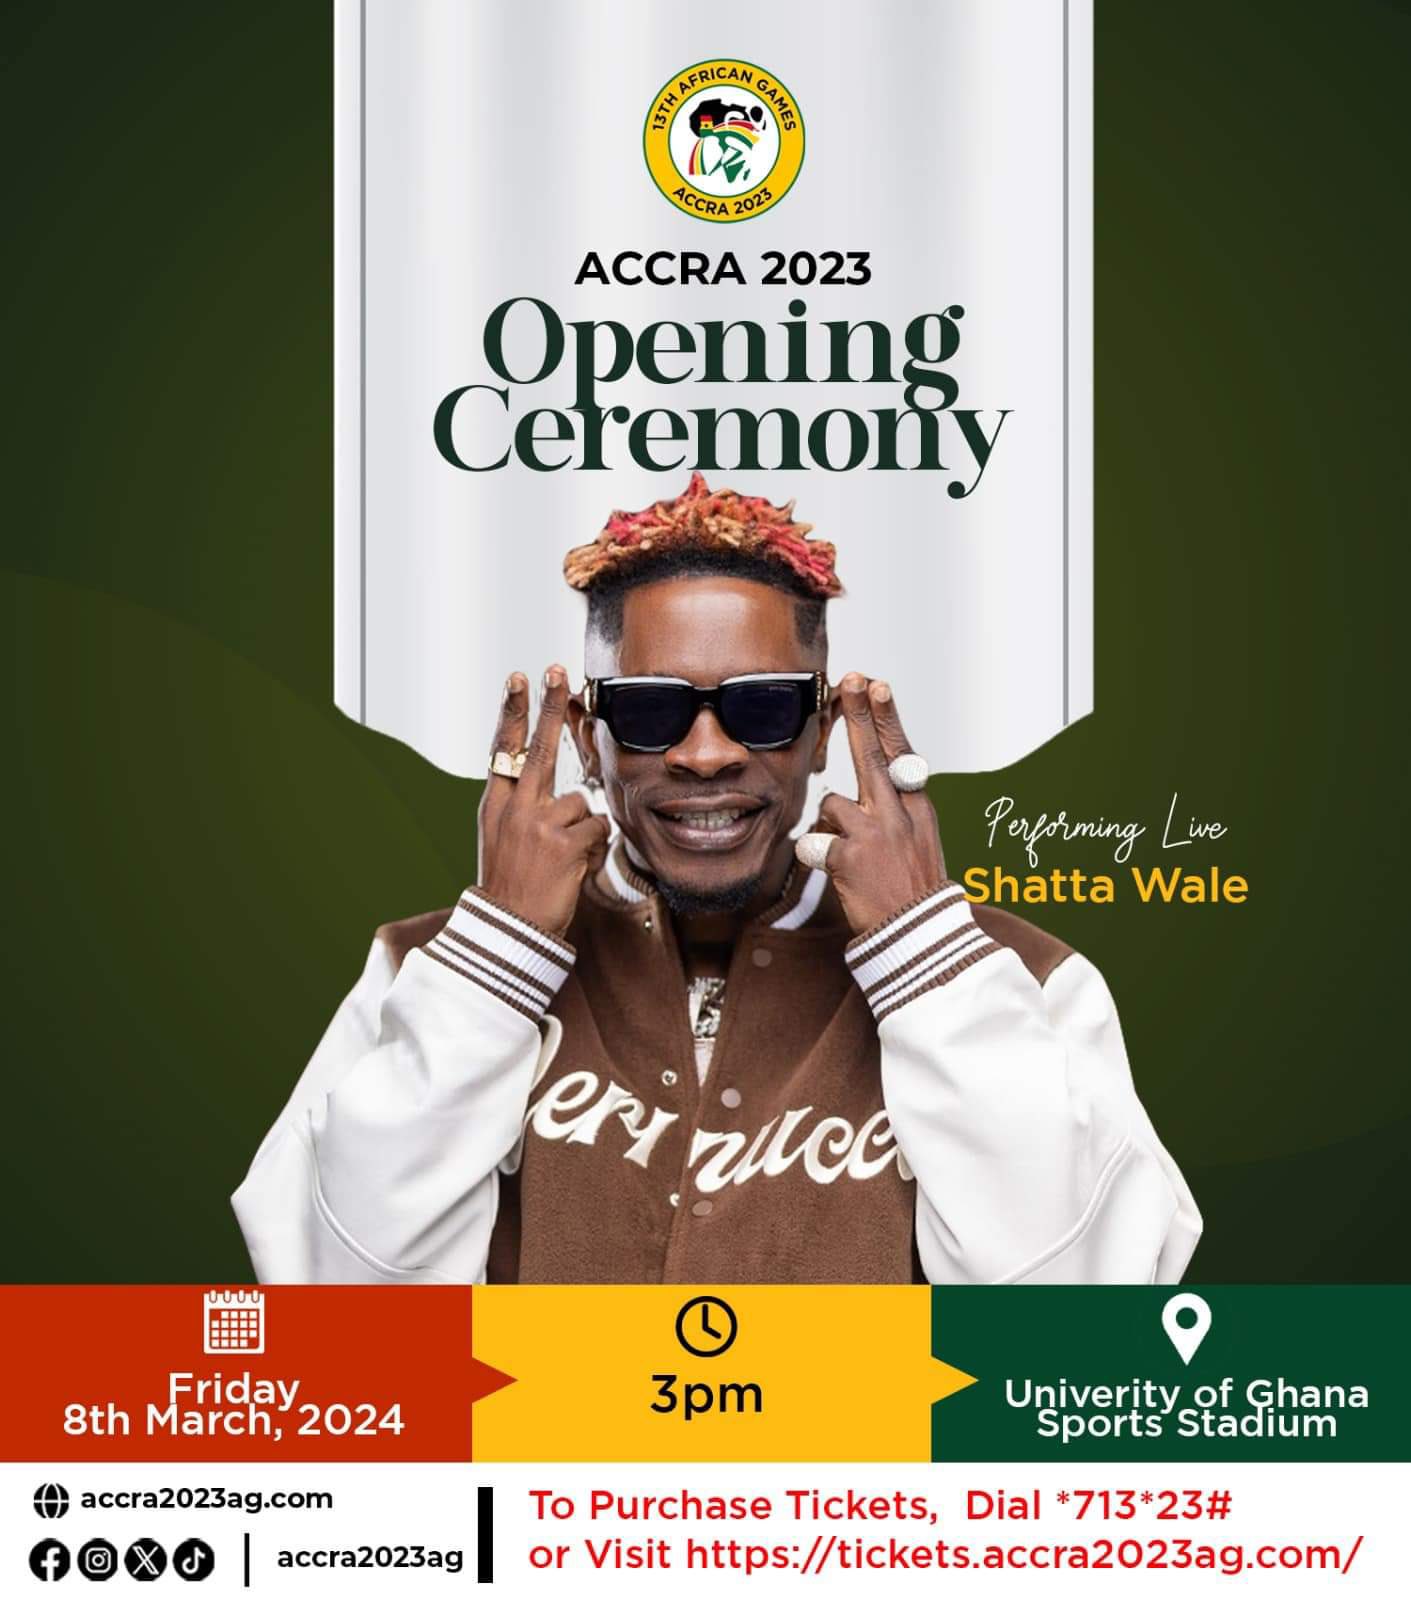 13th African Games: Shatta Wale, King Promise to perform at opening ceremony